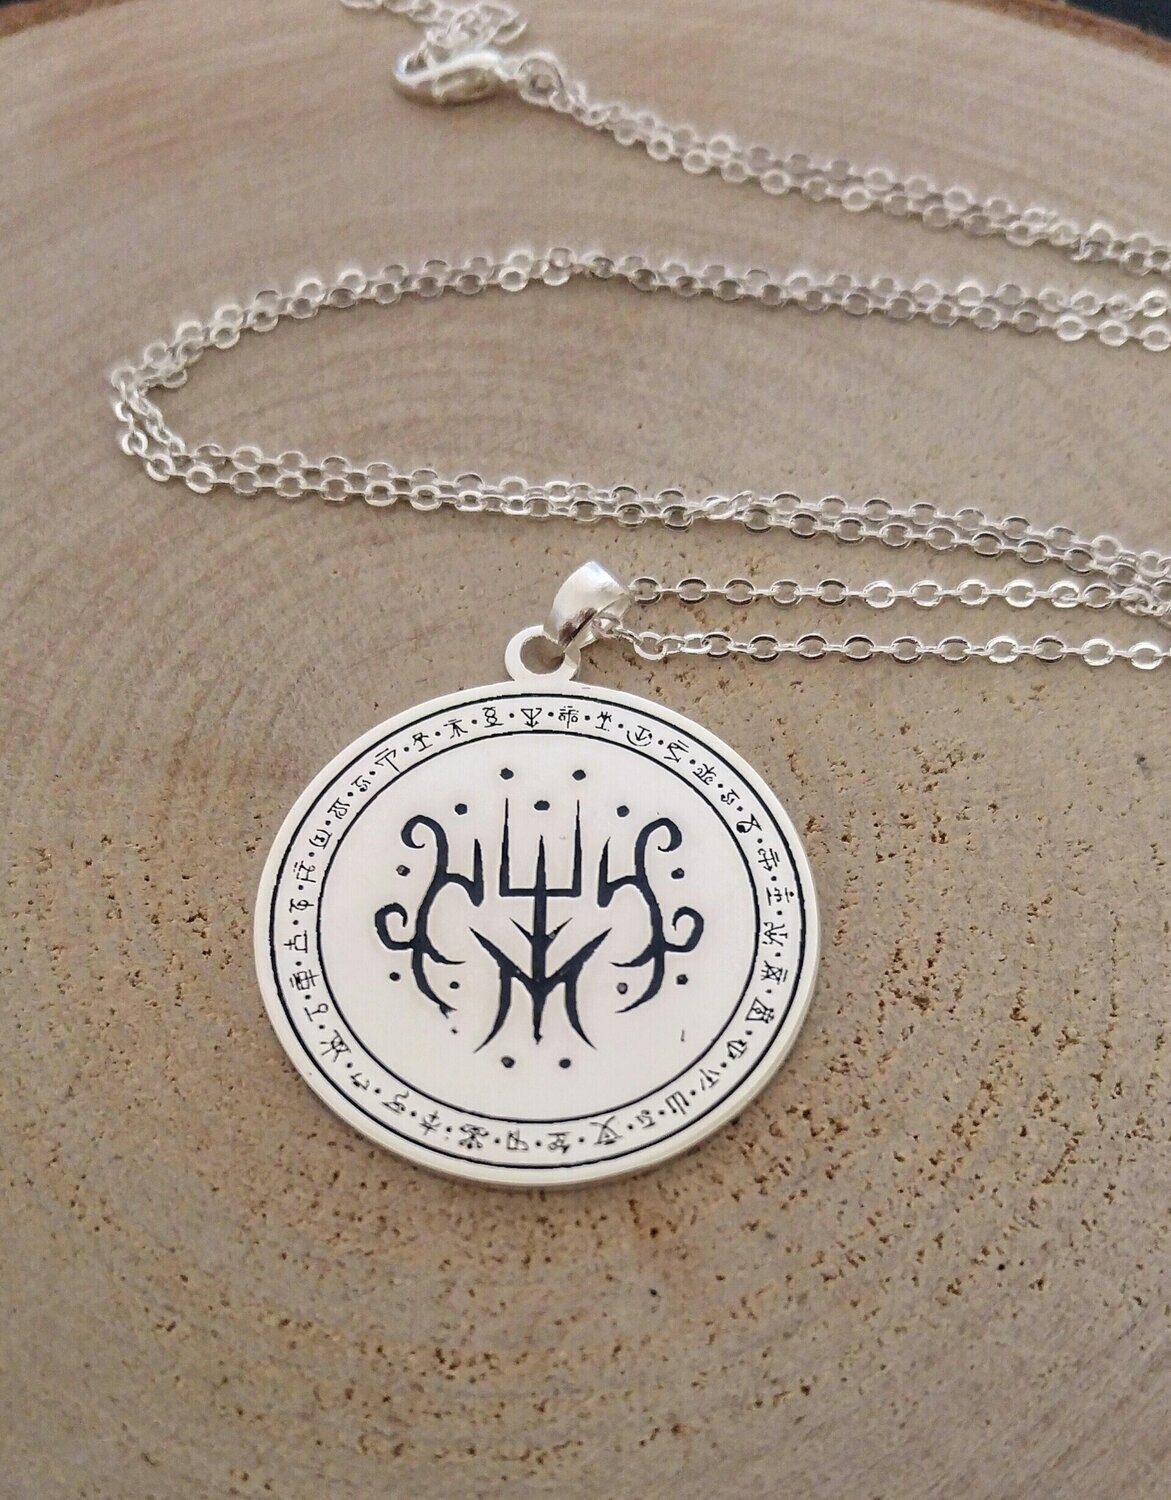 Witchcraft chaos magic sigil necklace amulet for protection